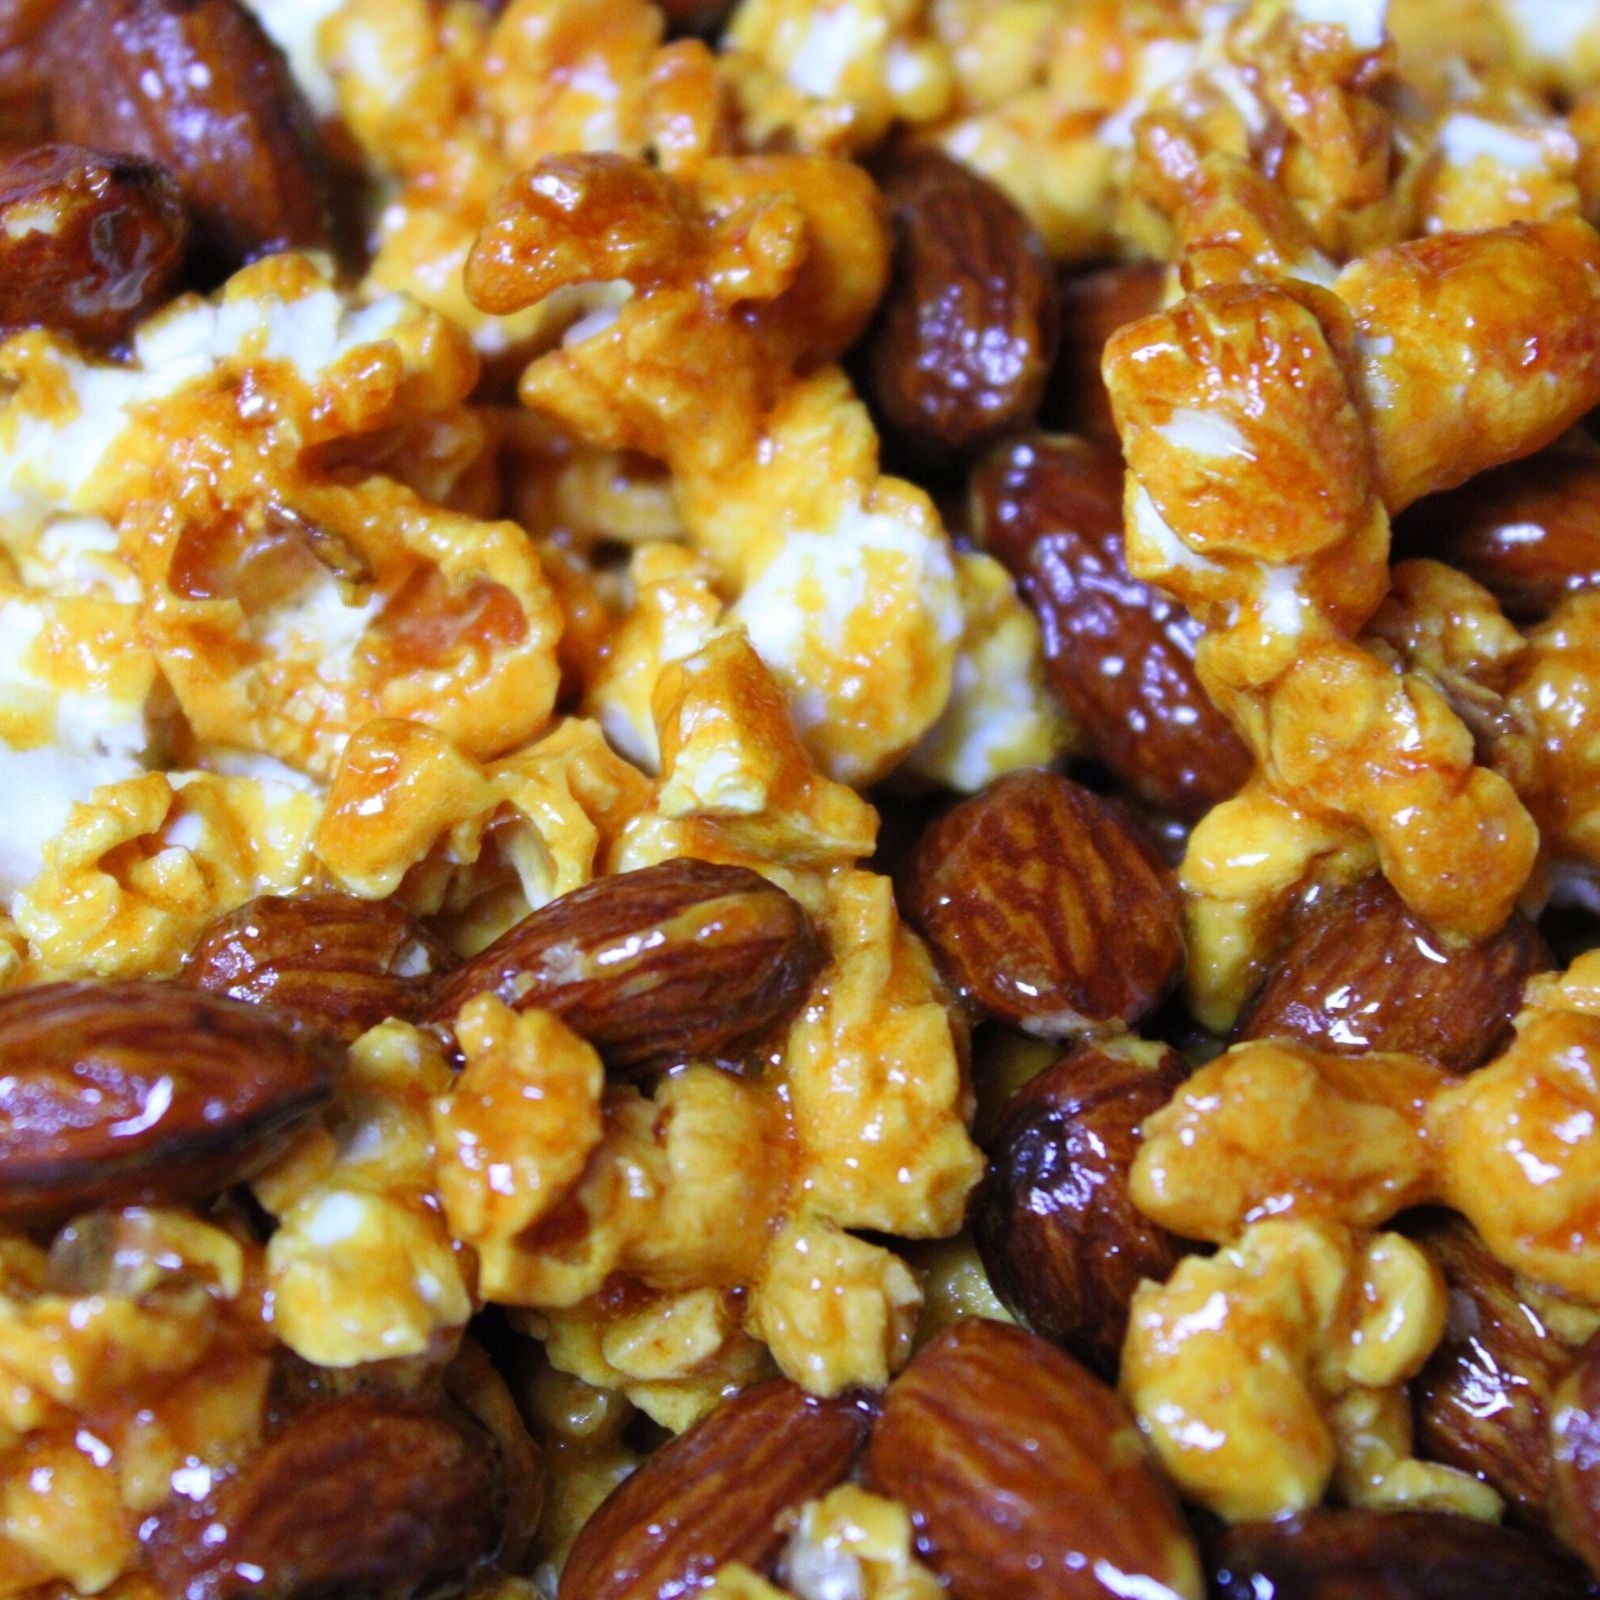 Calabrian Hot Honey Sticky Popcorn Bunches